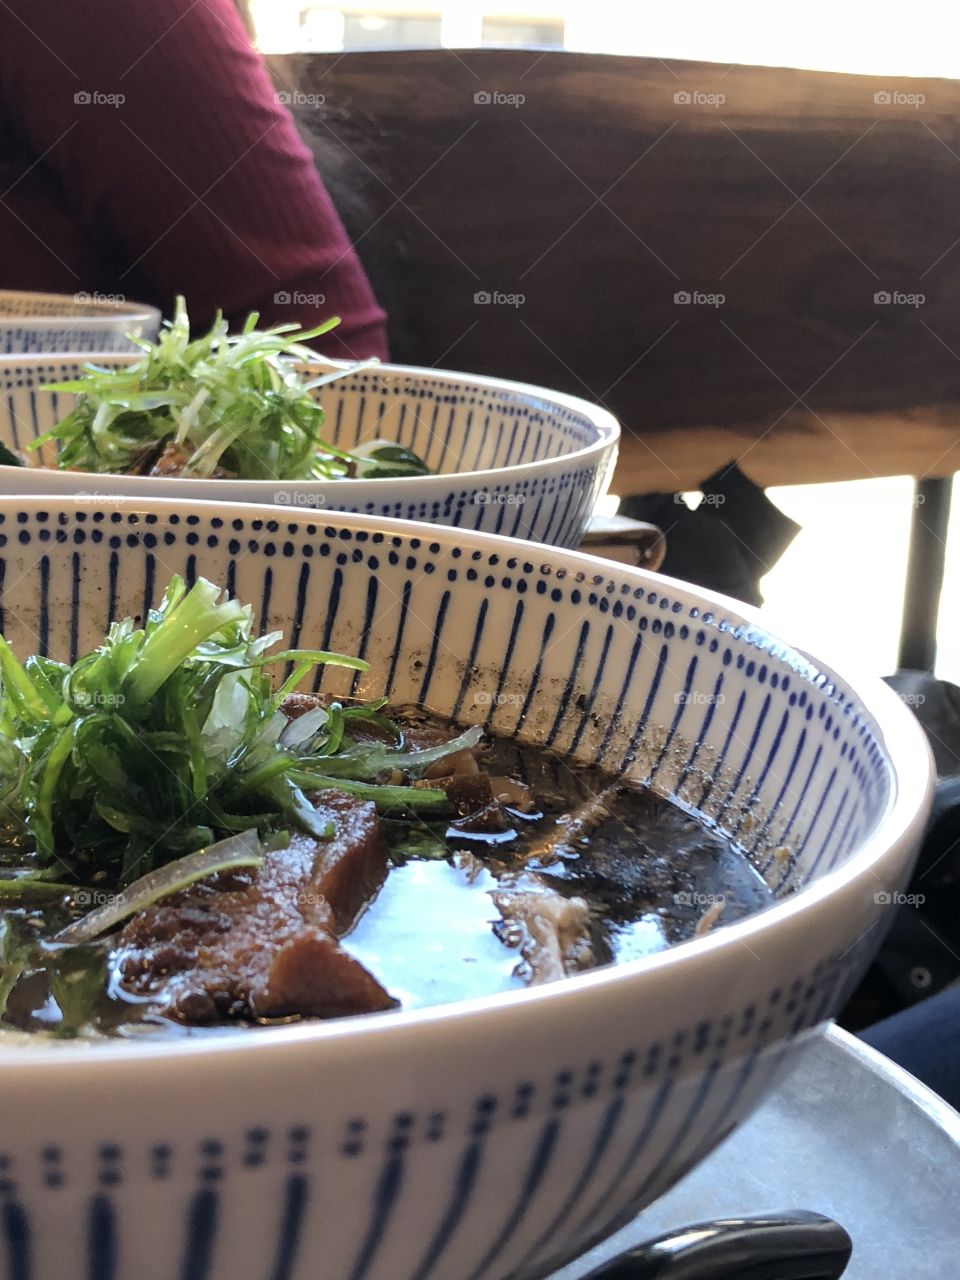 A giant bowl or ramen to curve the hunger. Beef, needles, mushrooms and chives. 